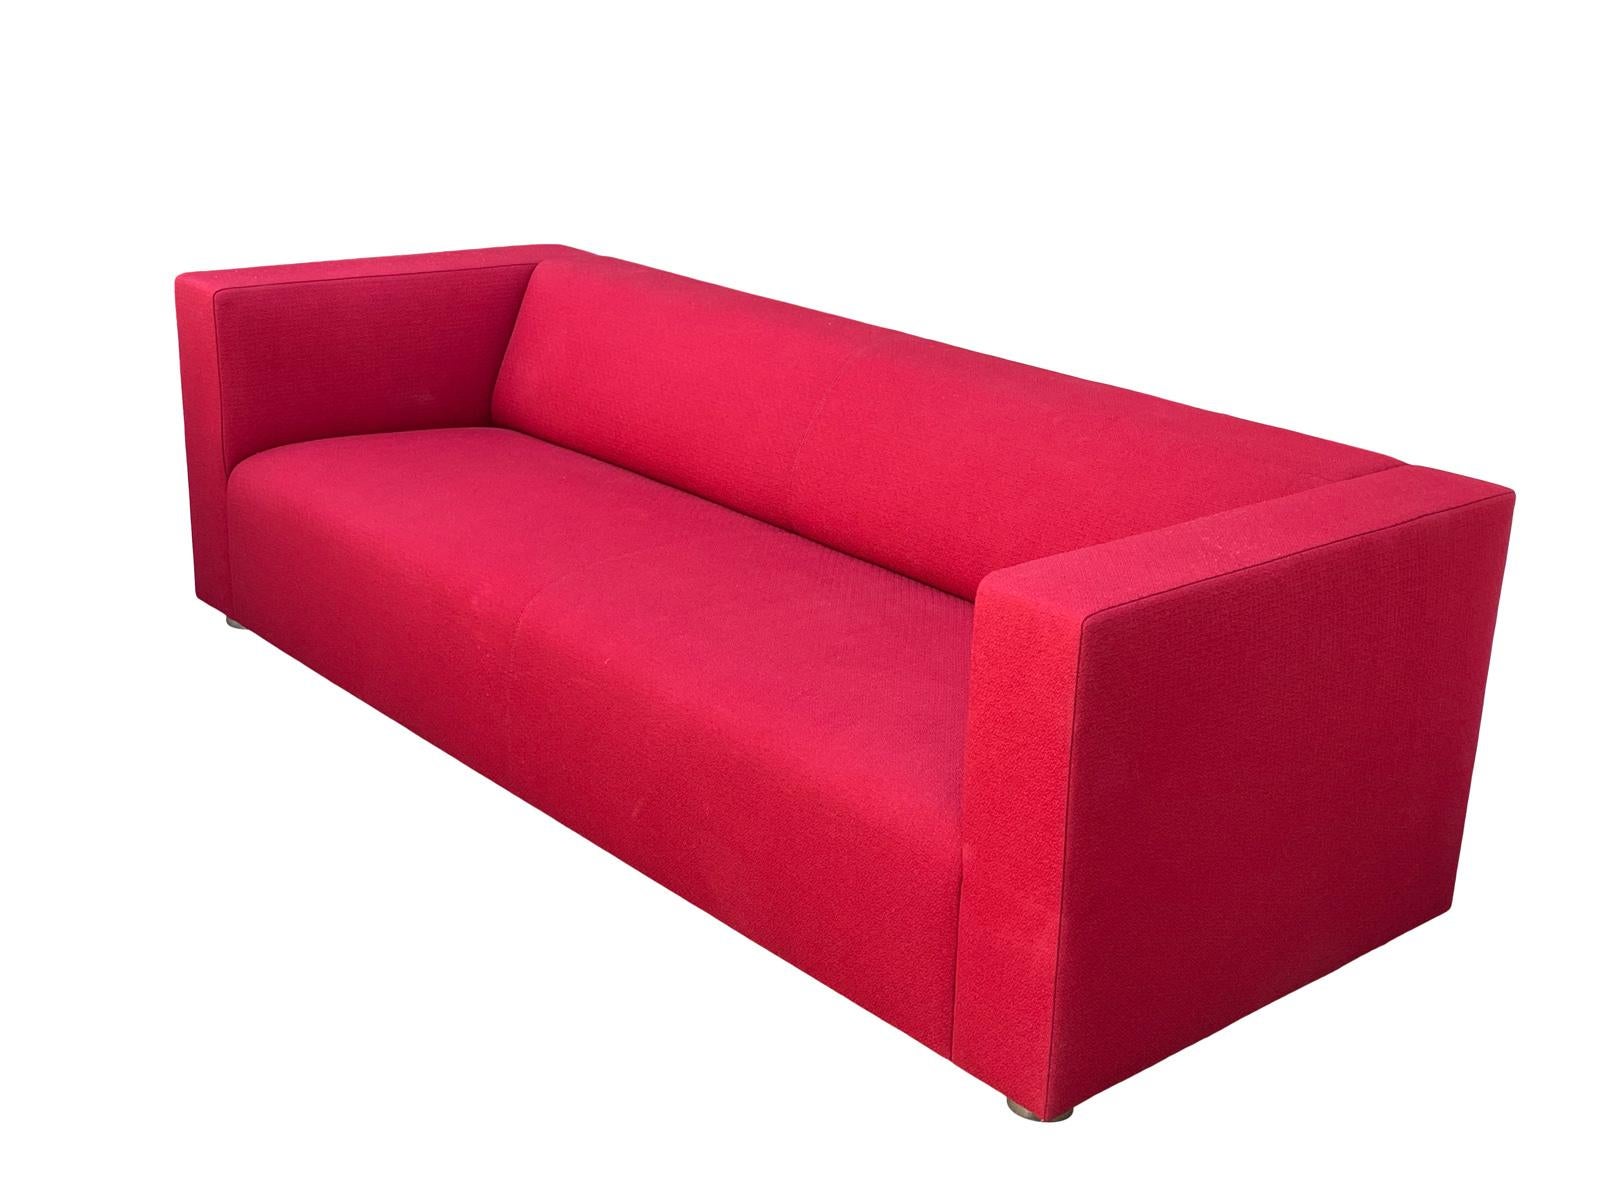 Edward Barber & Jay Osgerby Red Sofa For Knoll In Excellent Condition For Sale In Bensalem, PA